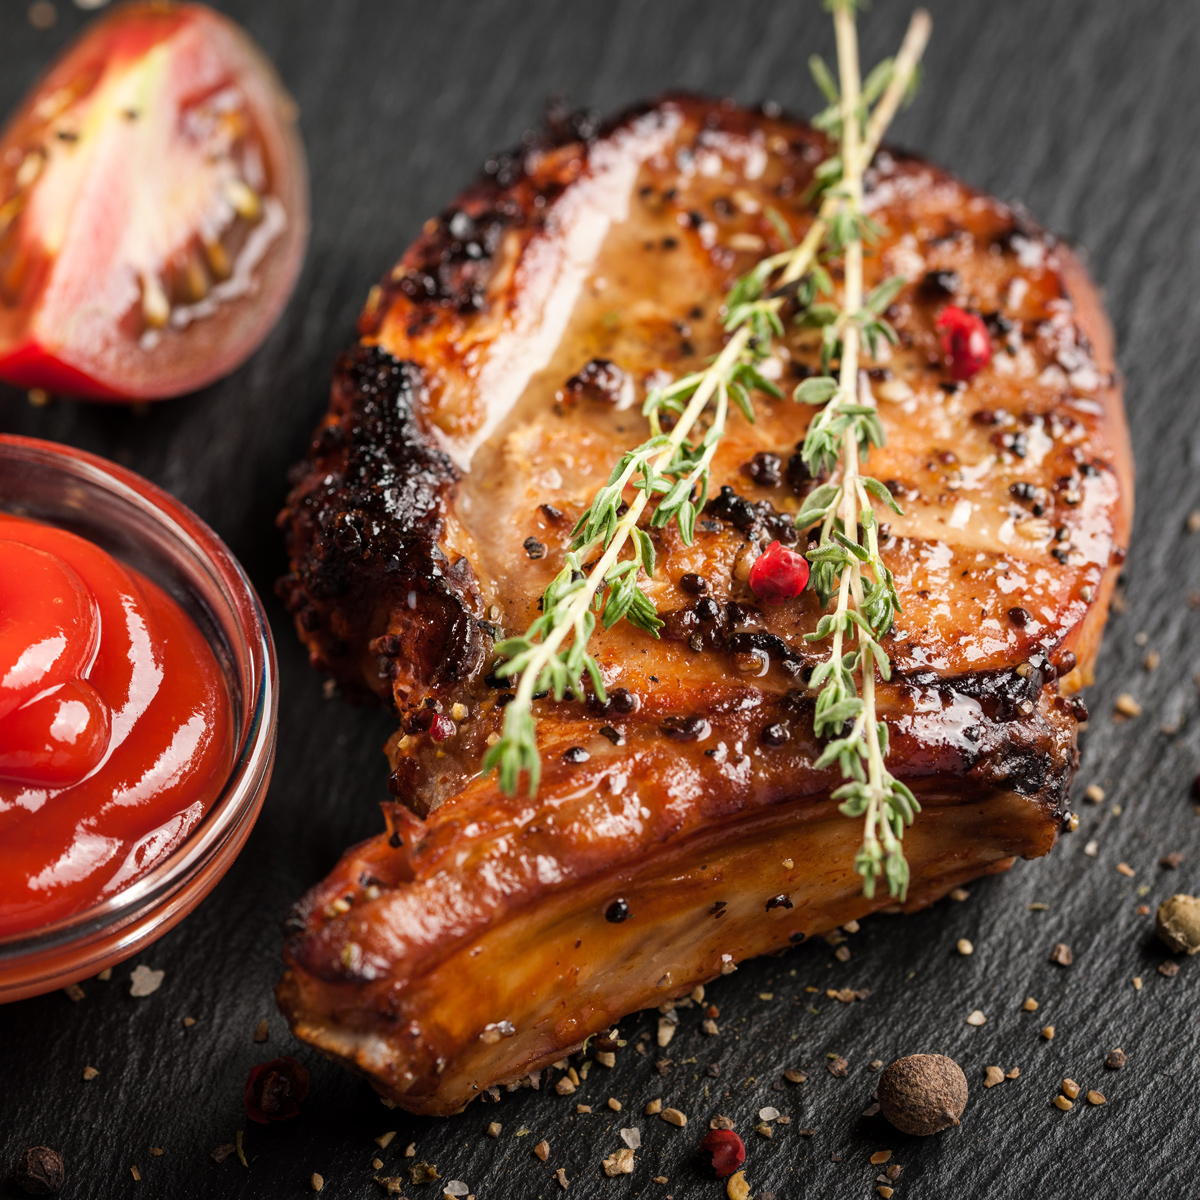 Grilled Applewood Smoked Pork Chop with Pressed Hard Cider Sauce